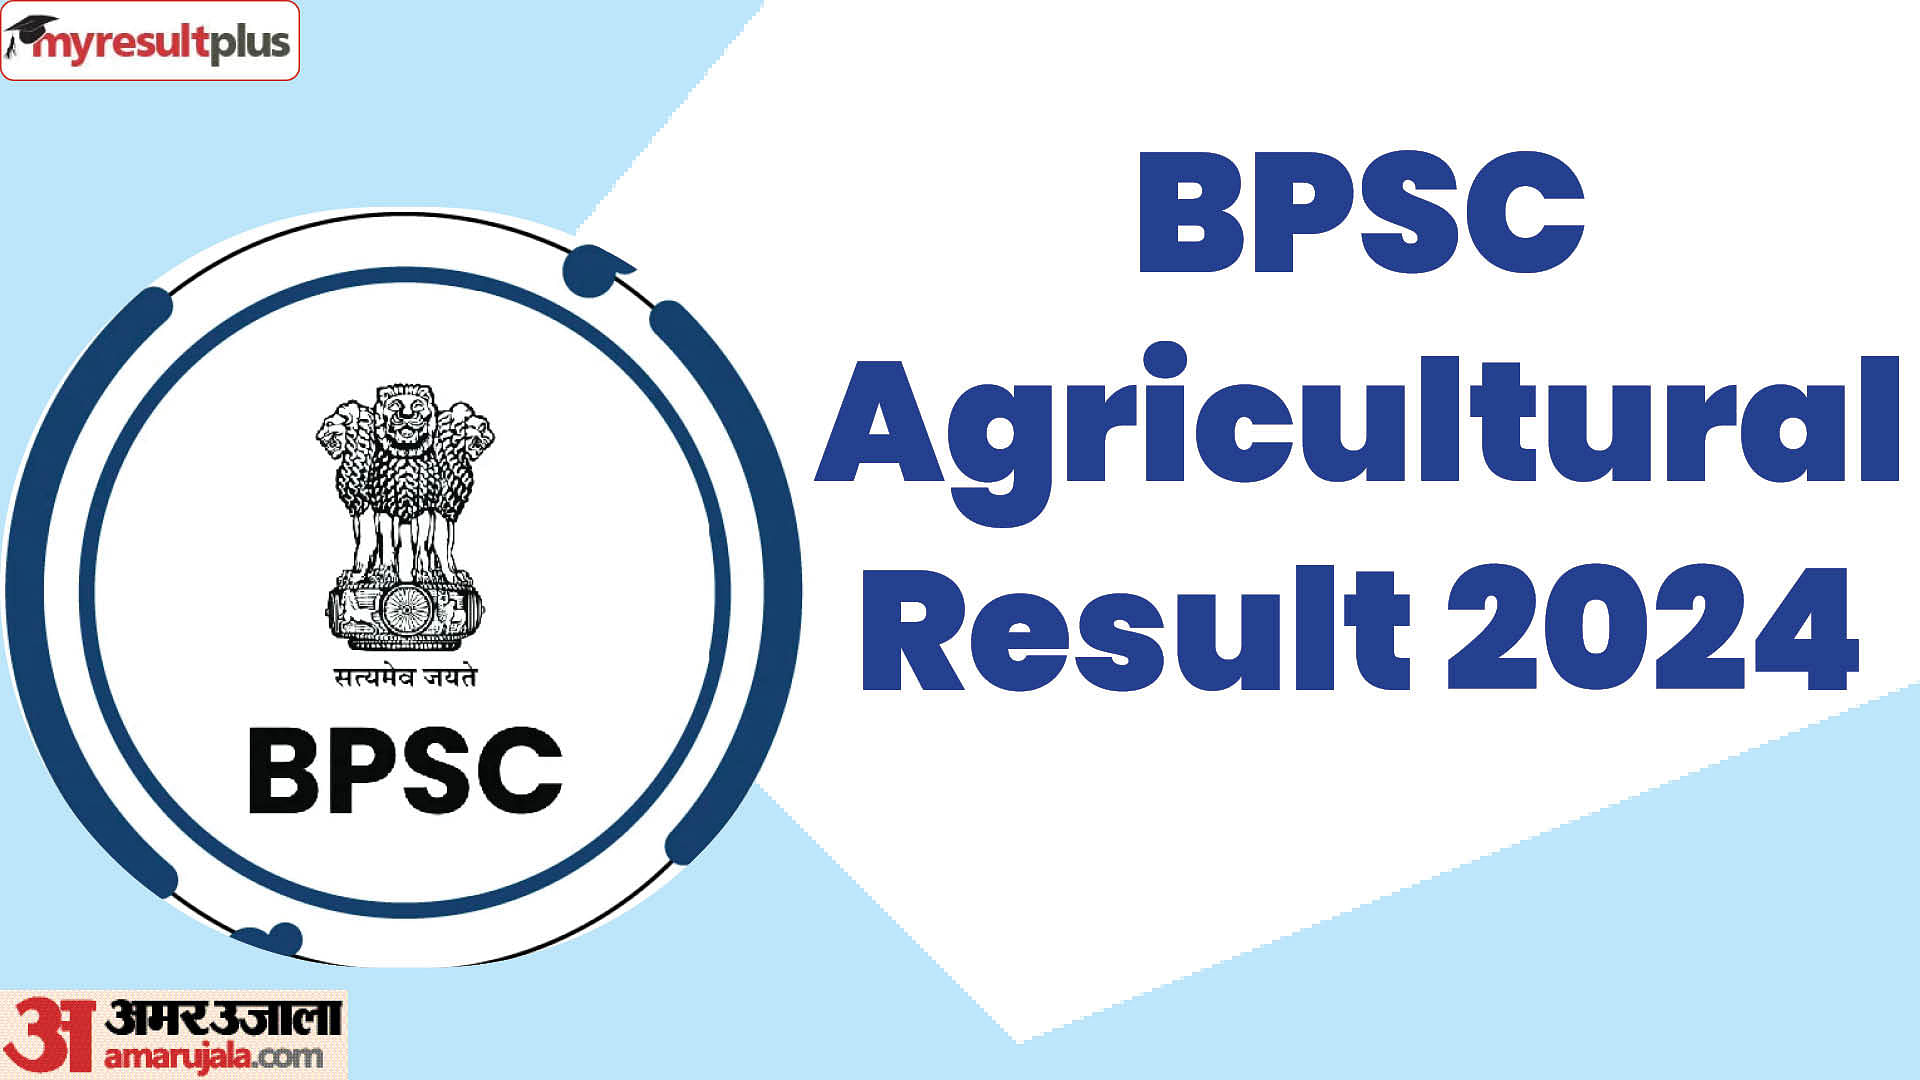 BPSC Agricultural Result 2024 released at bpsc.bih.nic.in, Read the steps to download scores here